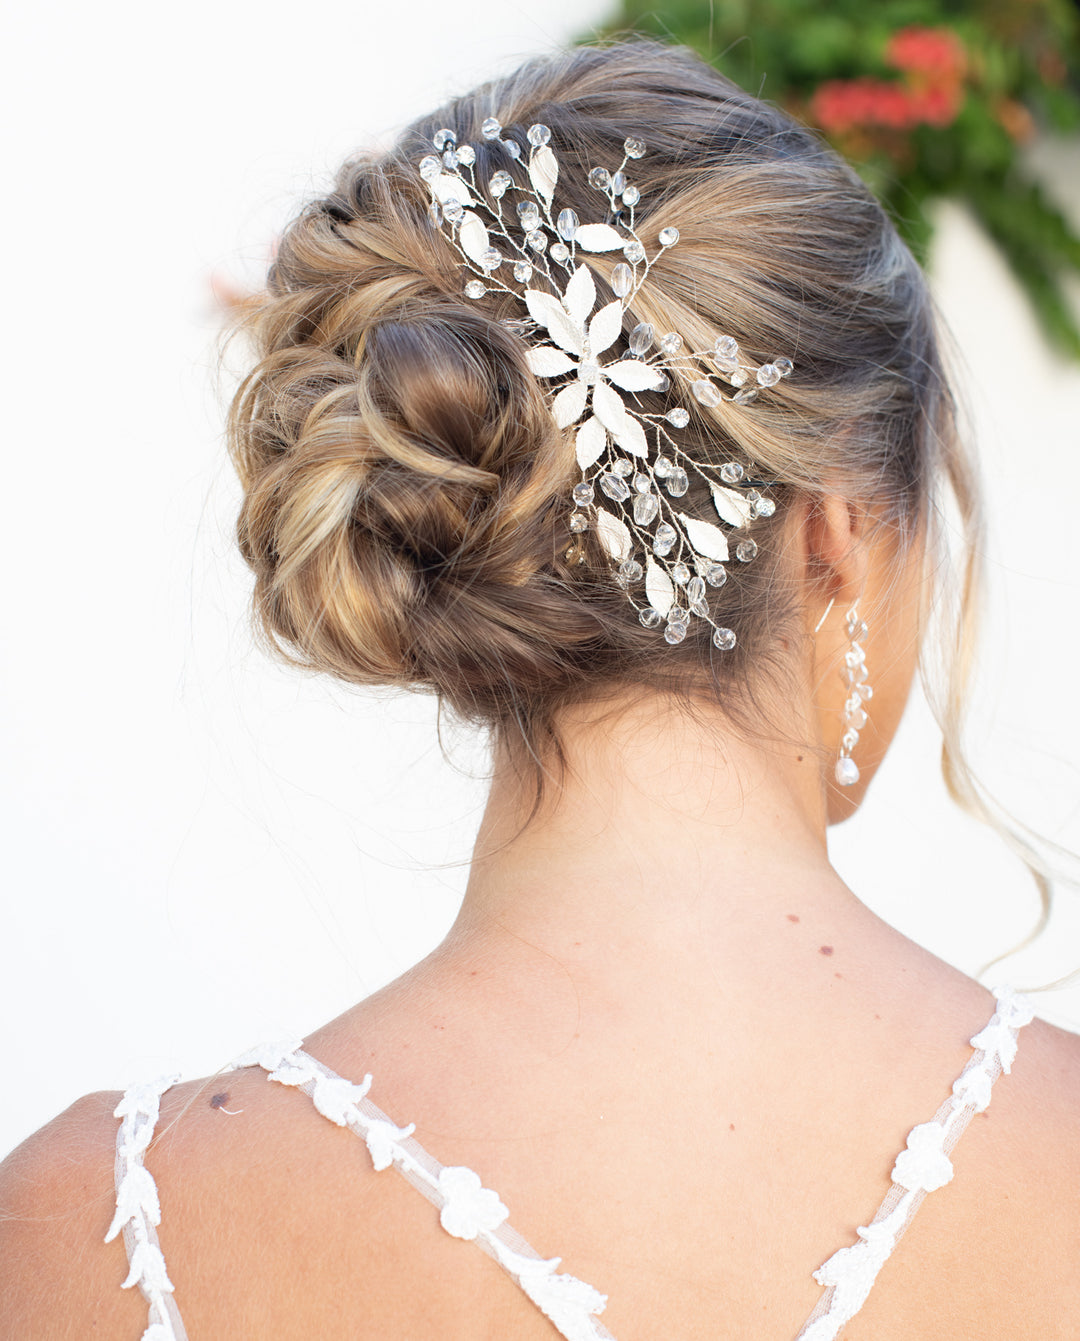 WHITE BRIDAL HEADDRESS COMB FLOWERS AND LEAVES